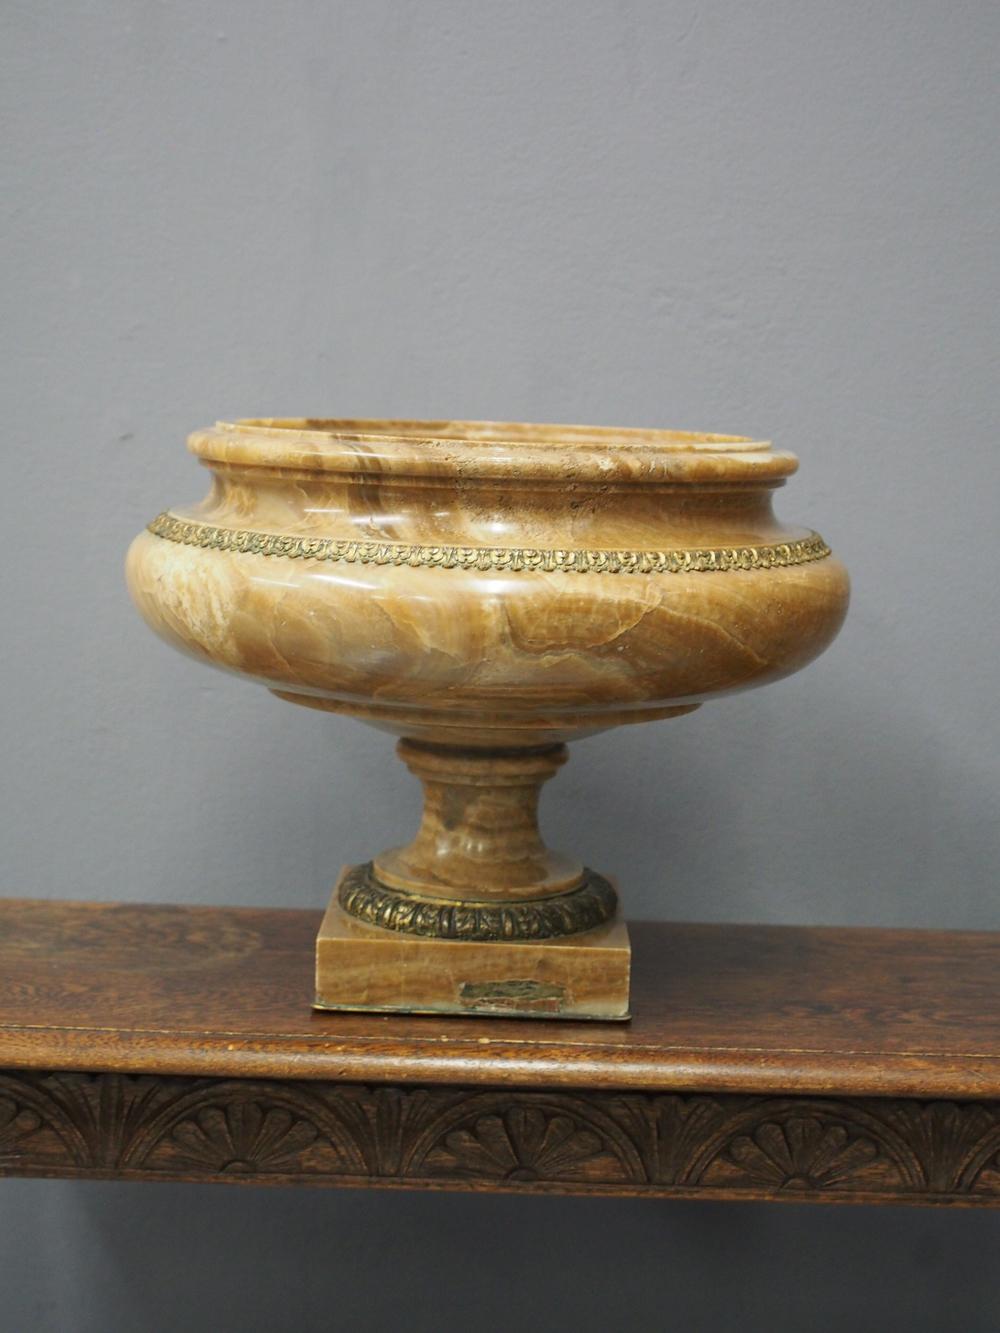 Roman style large Alabaster footed urn. The top and central aperture is unpolished and rises up to a raised for edge. There is a gilded section near the top and it is on a stem with foliate casting before finishing on a square block with brass